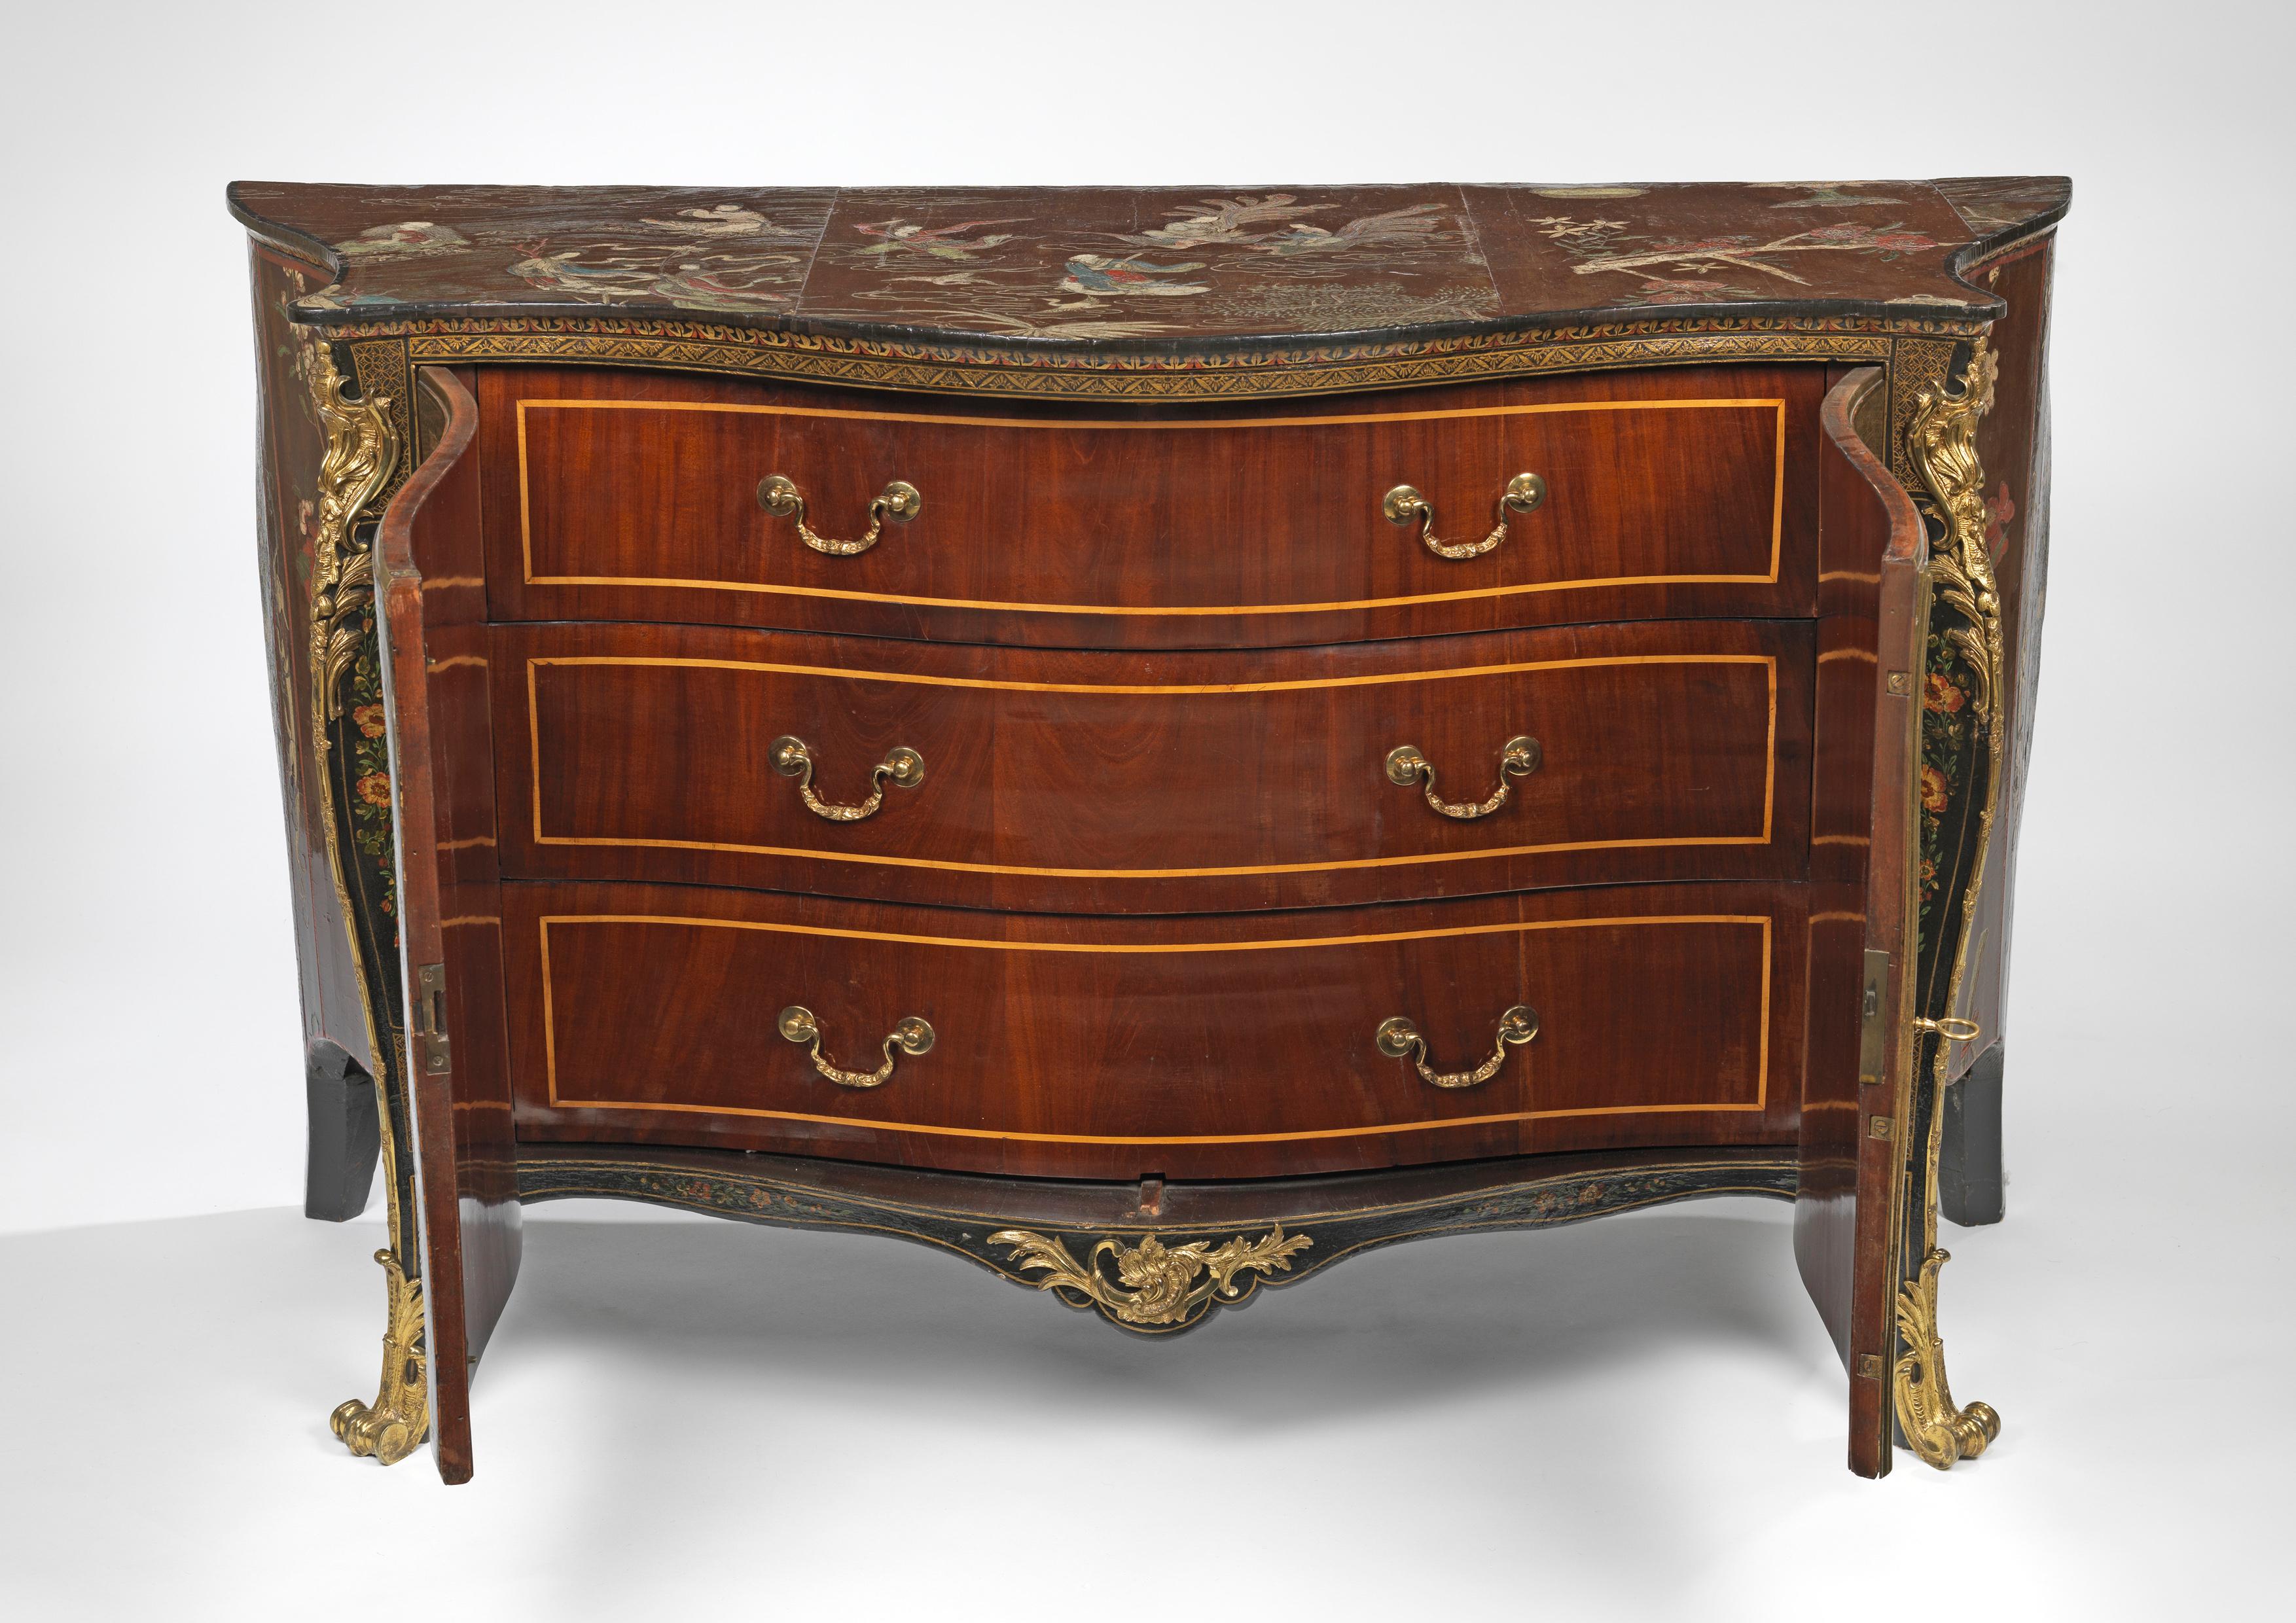 A George III Coromandel lacquer, gilt brass-mounted serpentine commode, attributed to Pierre Langlois, the mounts possibly supplied by Dominique Jean

The top decorated with a series of figures in various pursuits amongst cloud swirl motifs,